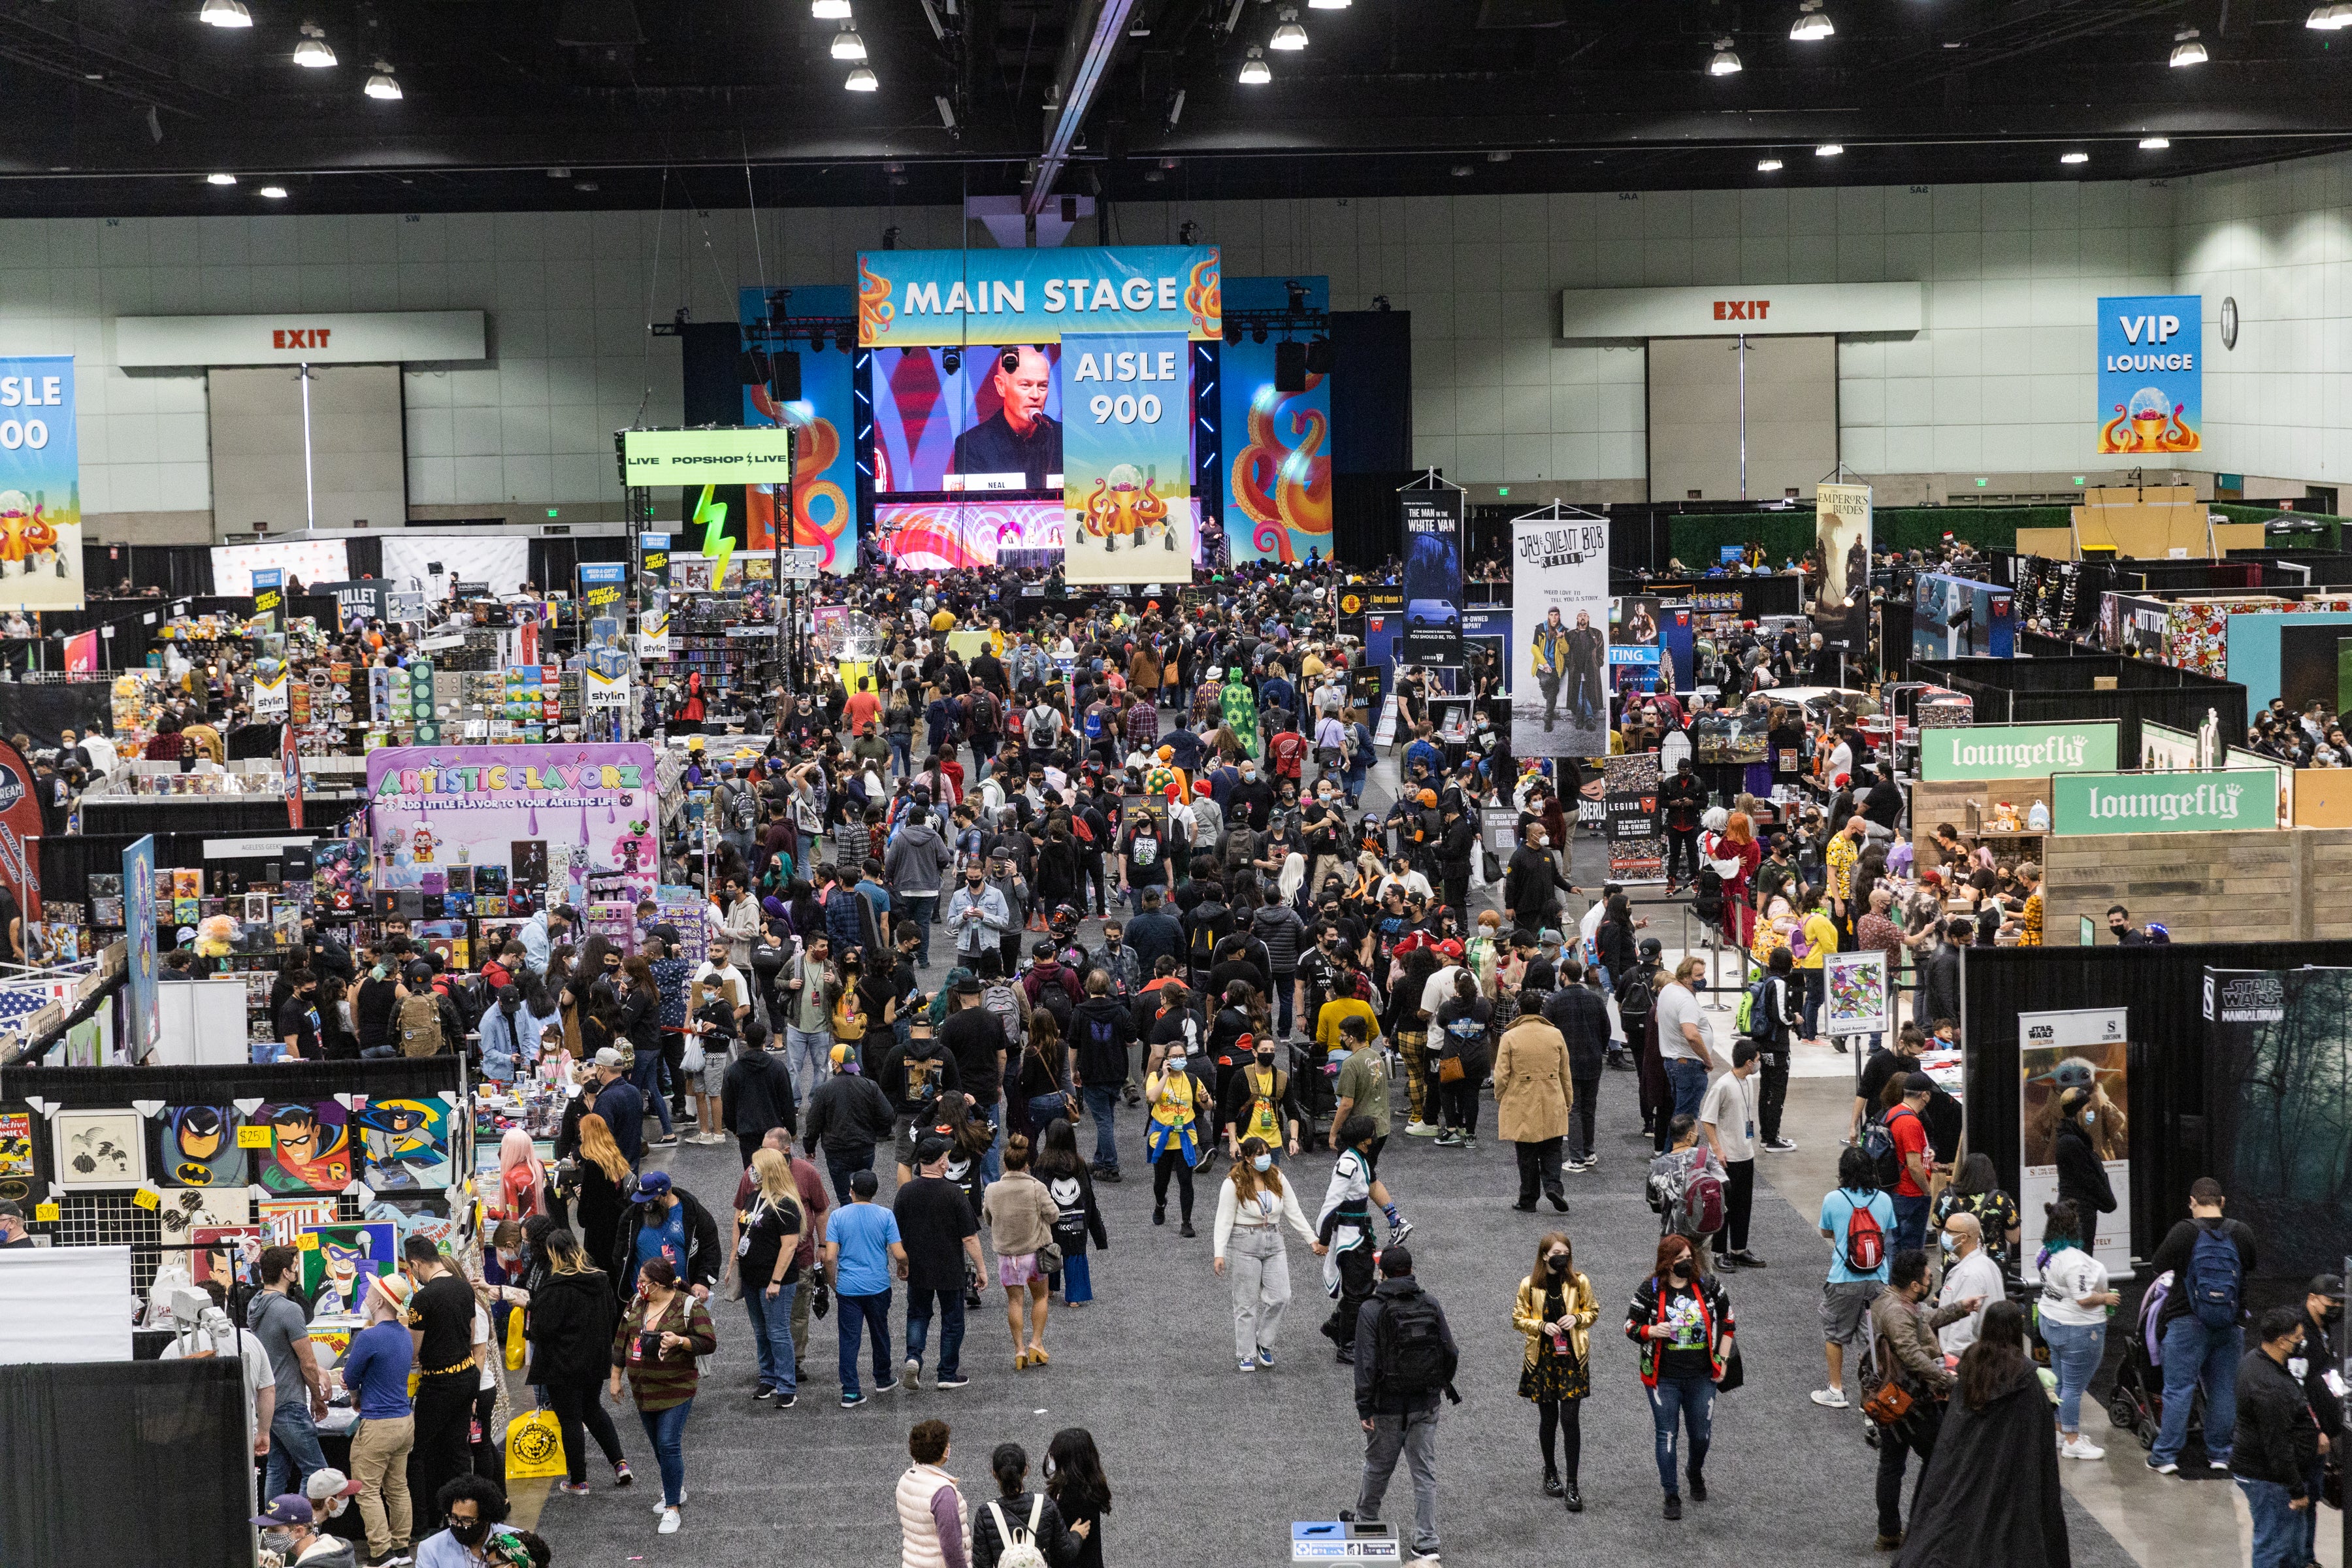 Photograph of the interior of the Los Angeles Convention Center during LA Comic Con 2021